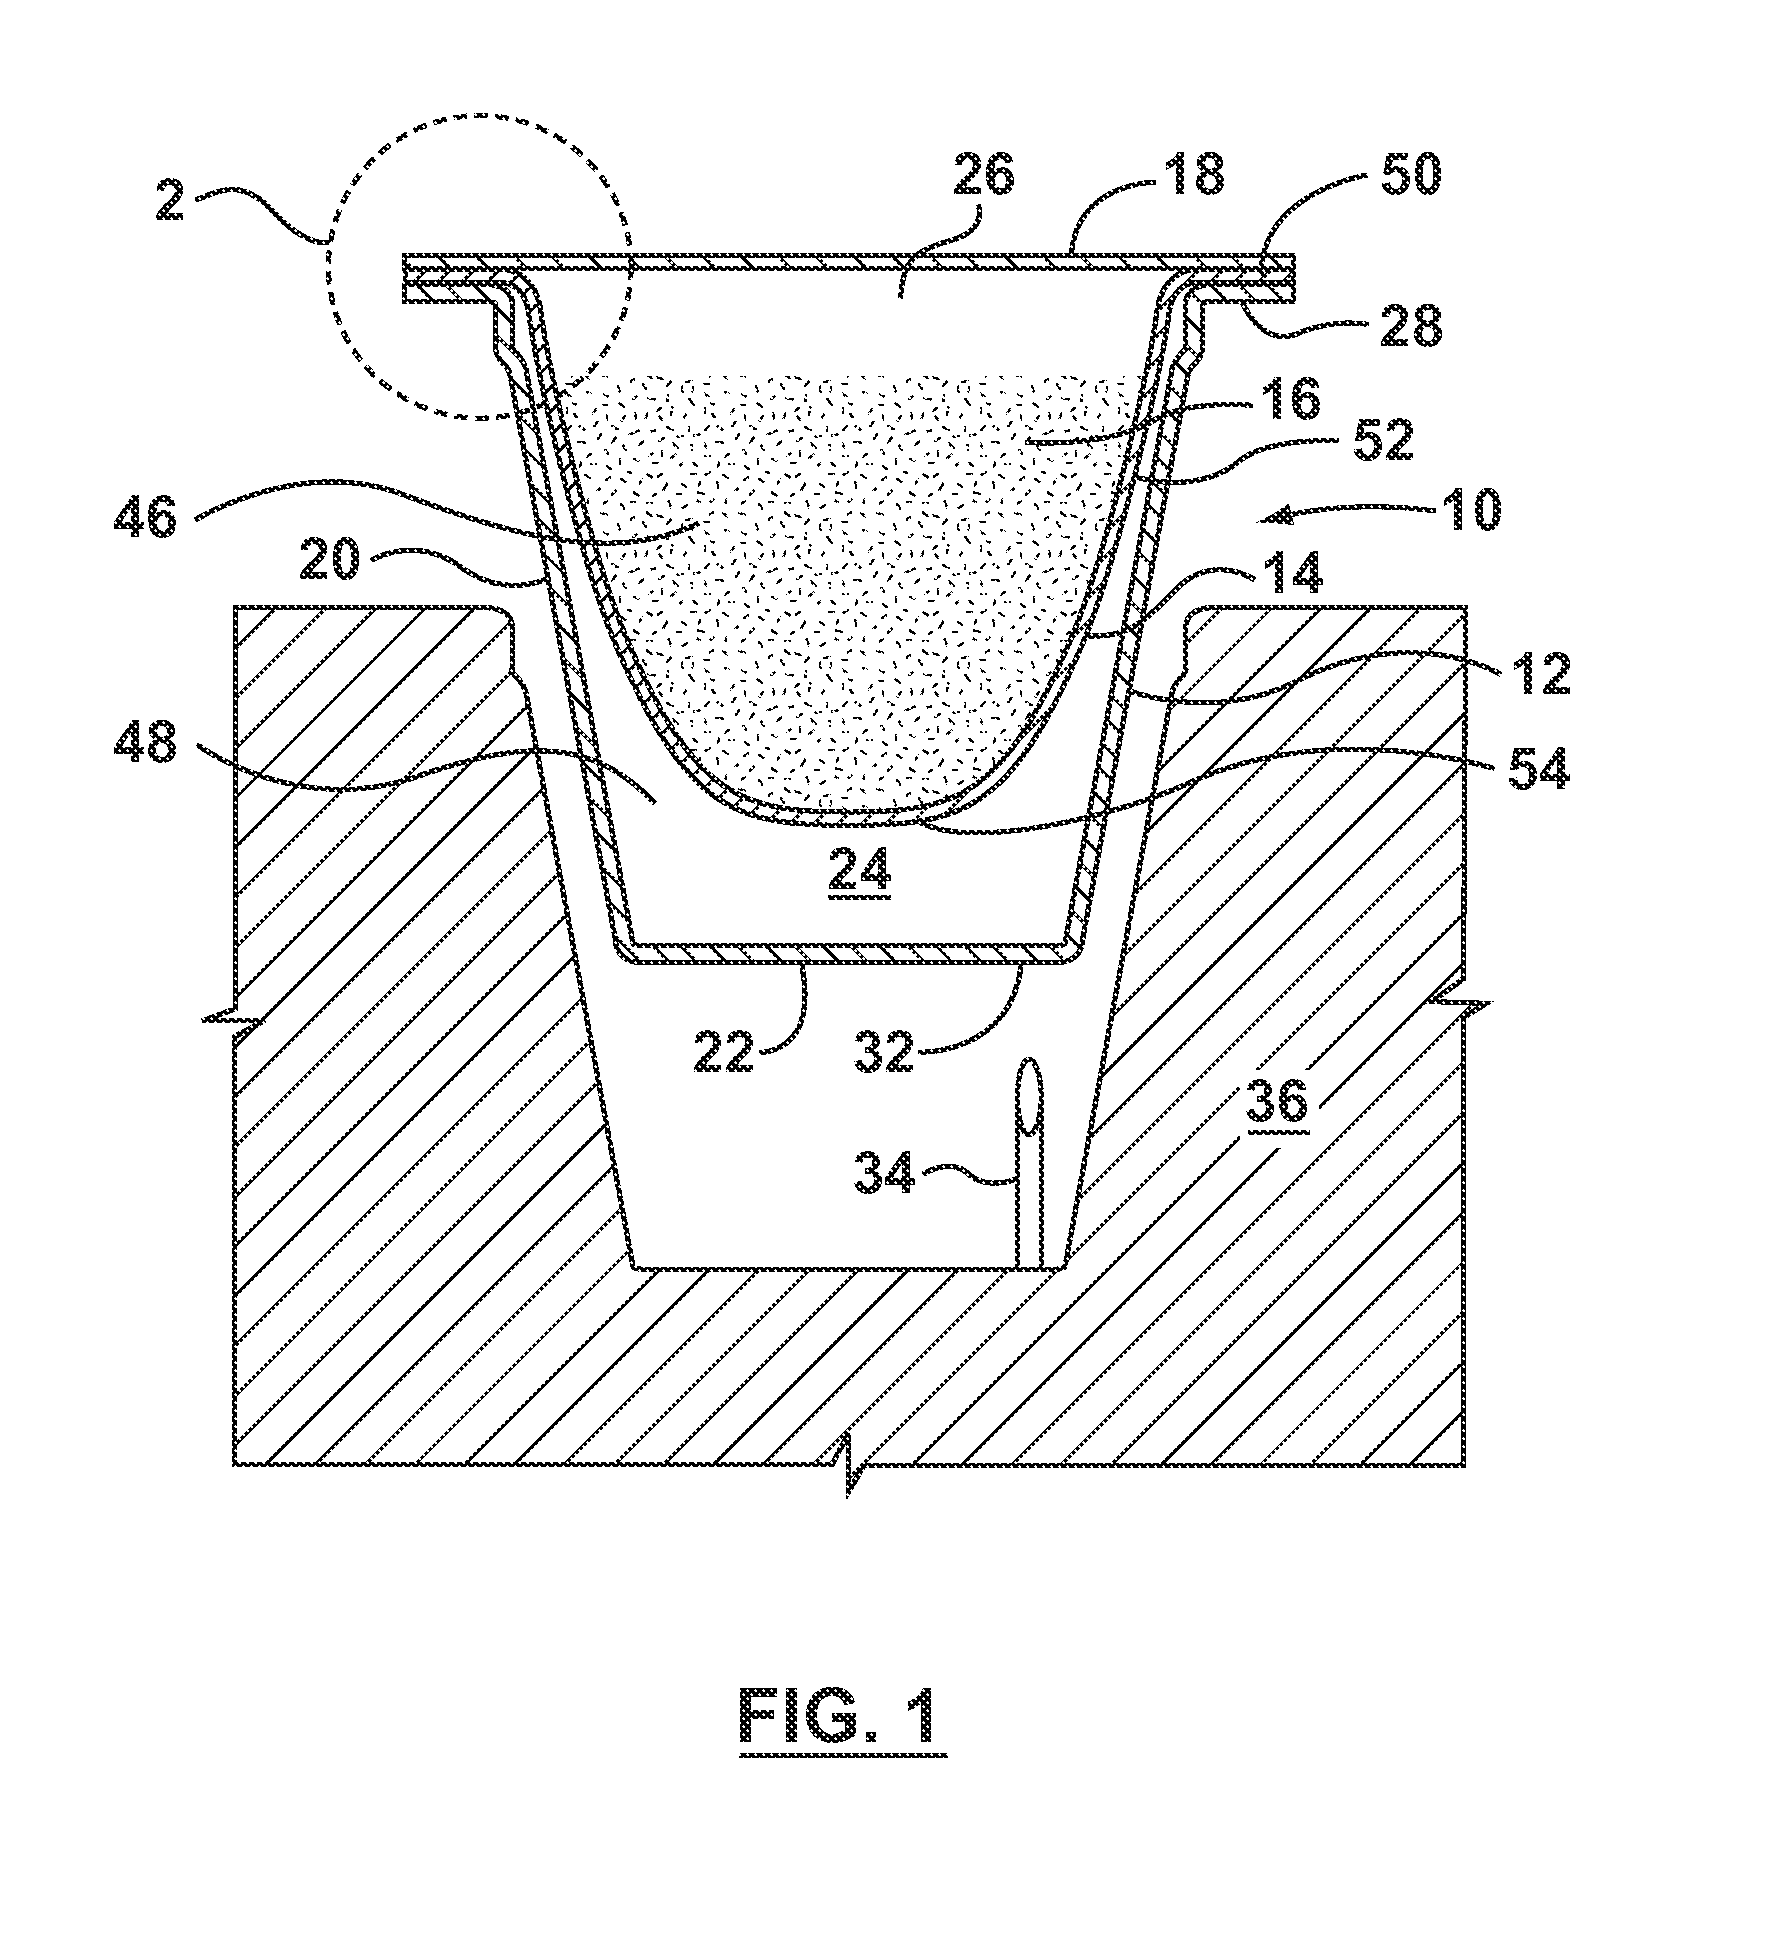 Single serve capsule for improved extraction efficiency and favor retention